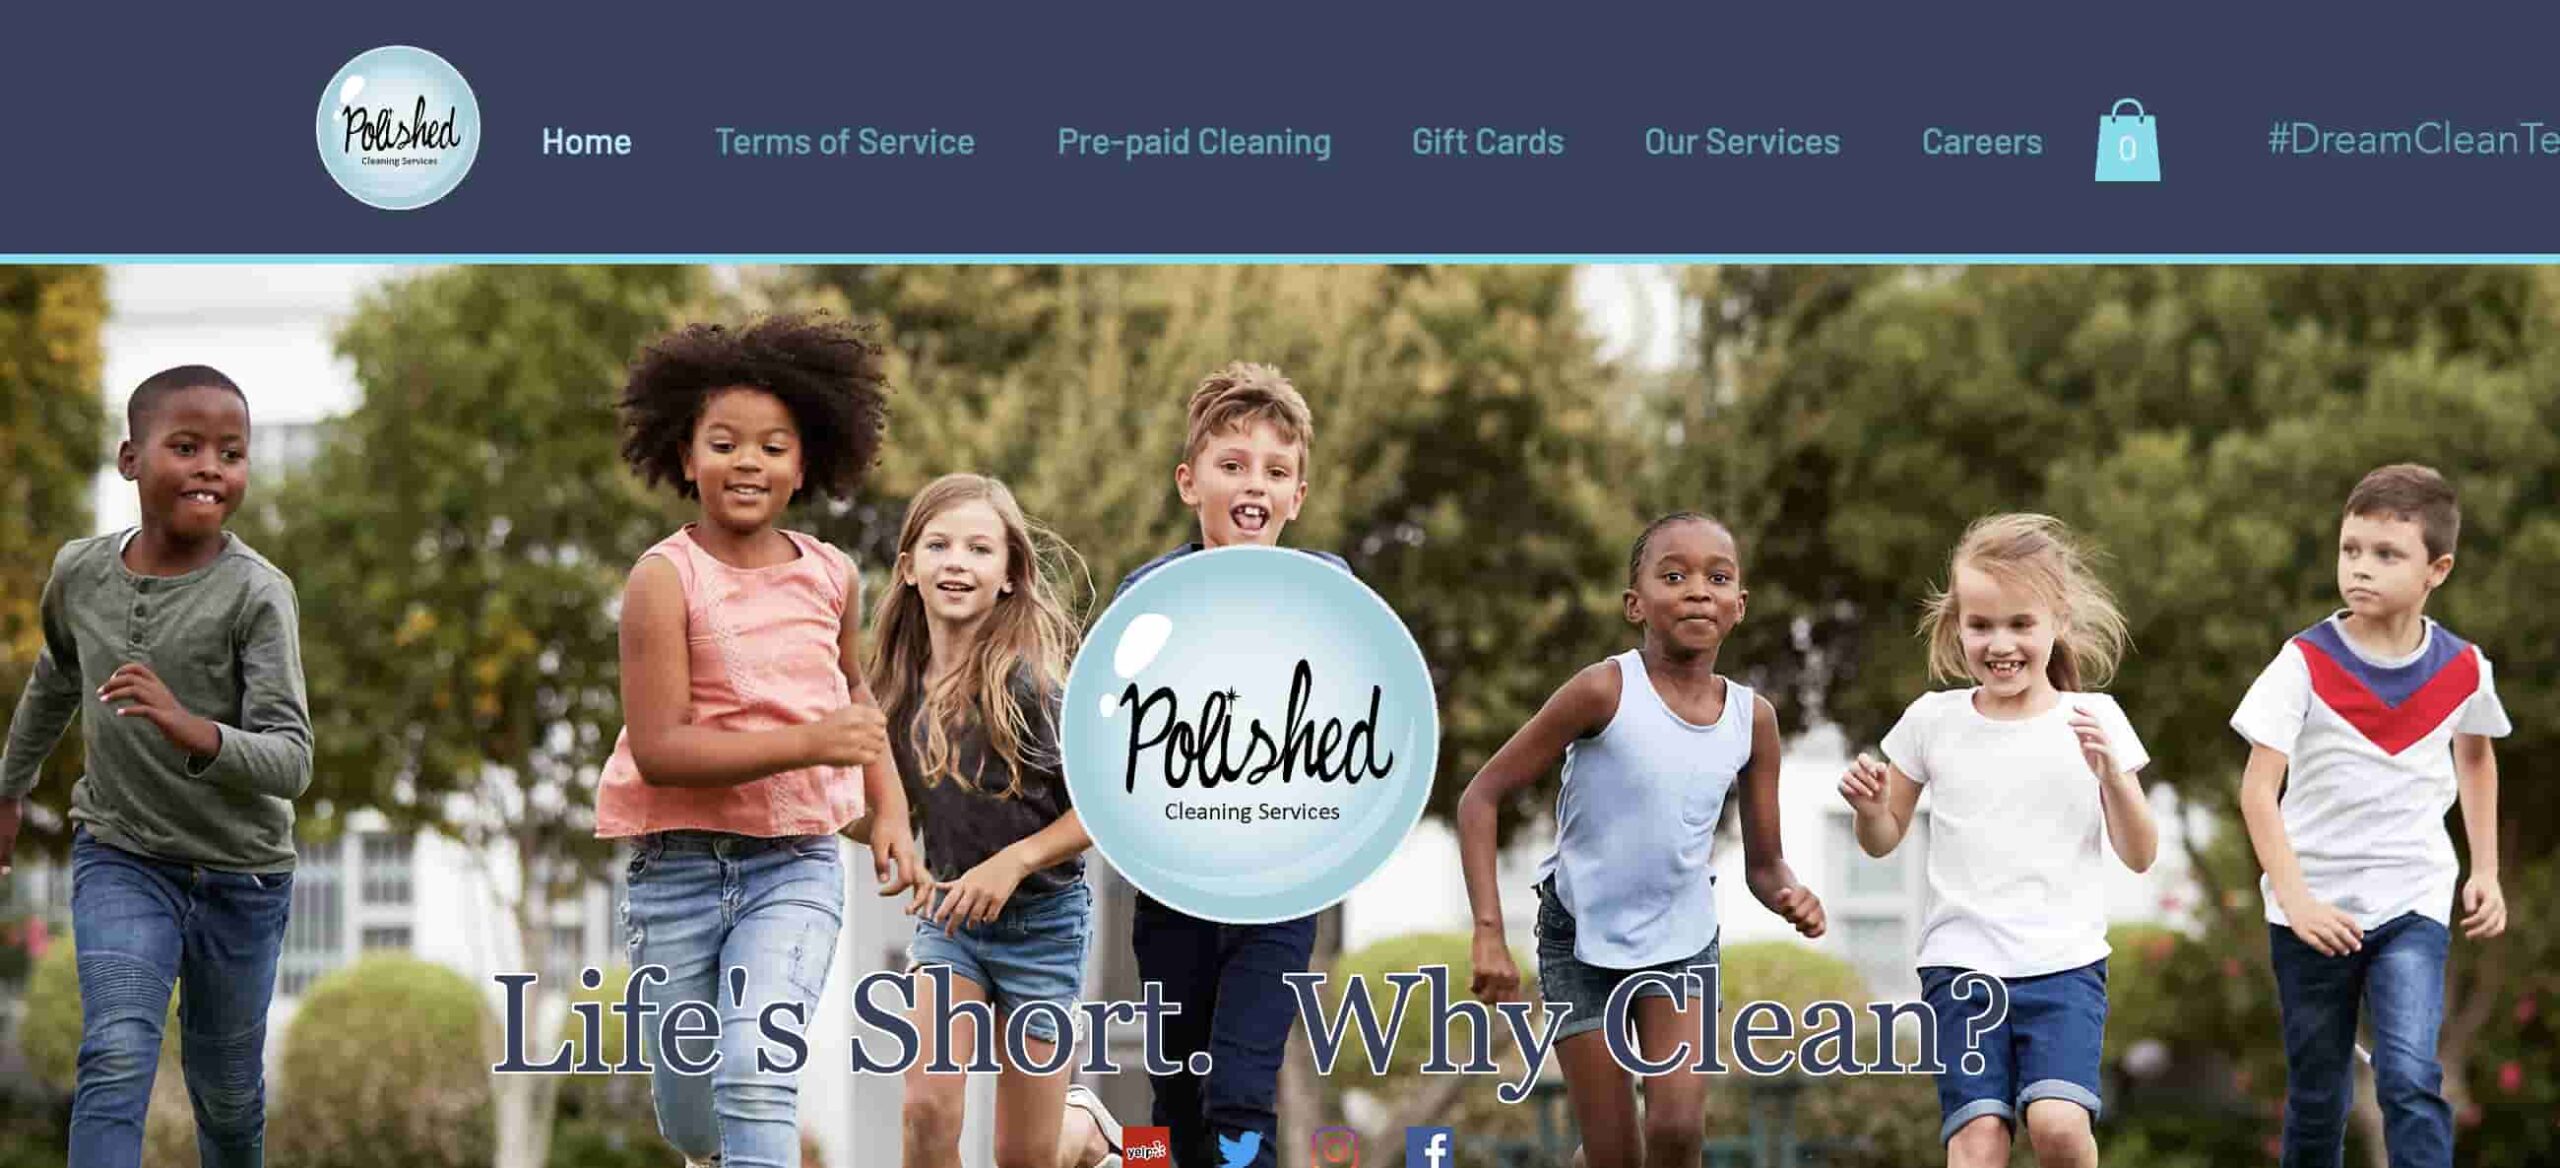 Polished Cleaning Services